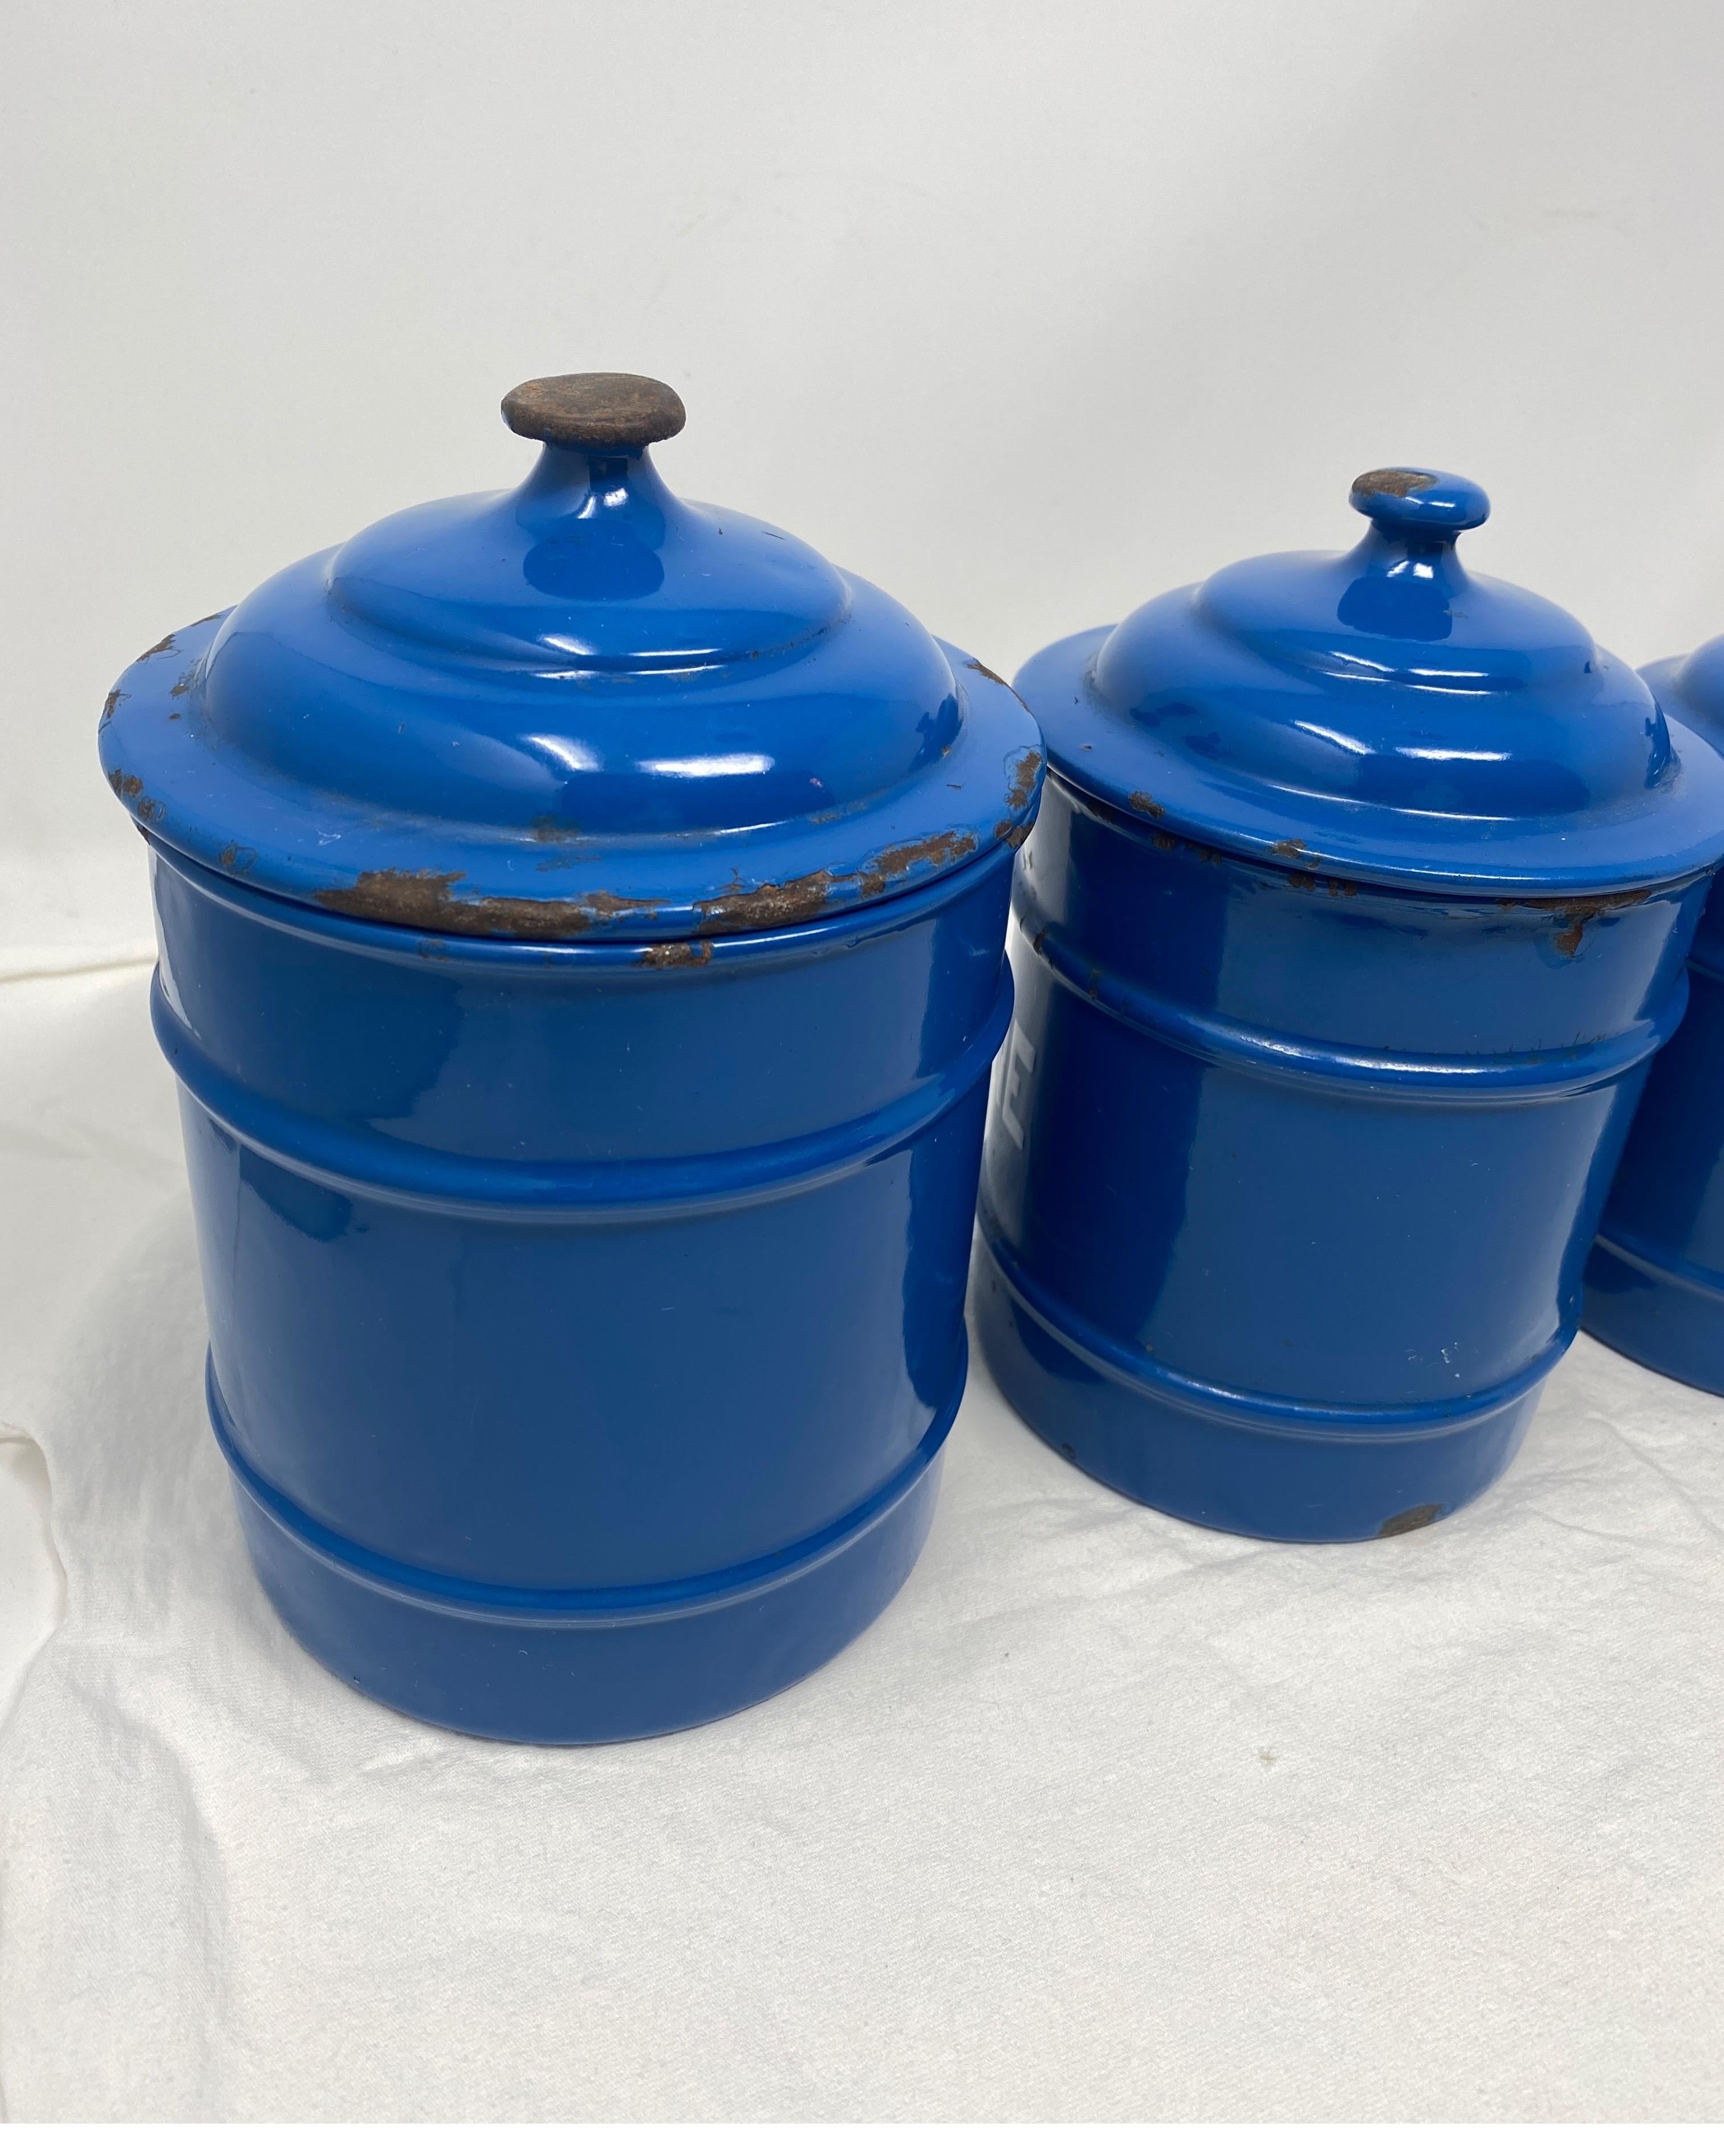 20th Century Set of 5 Enameled Canisters